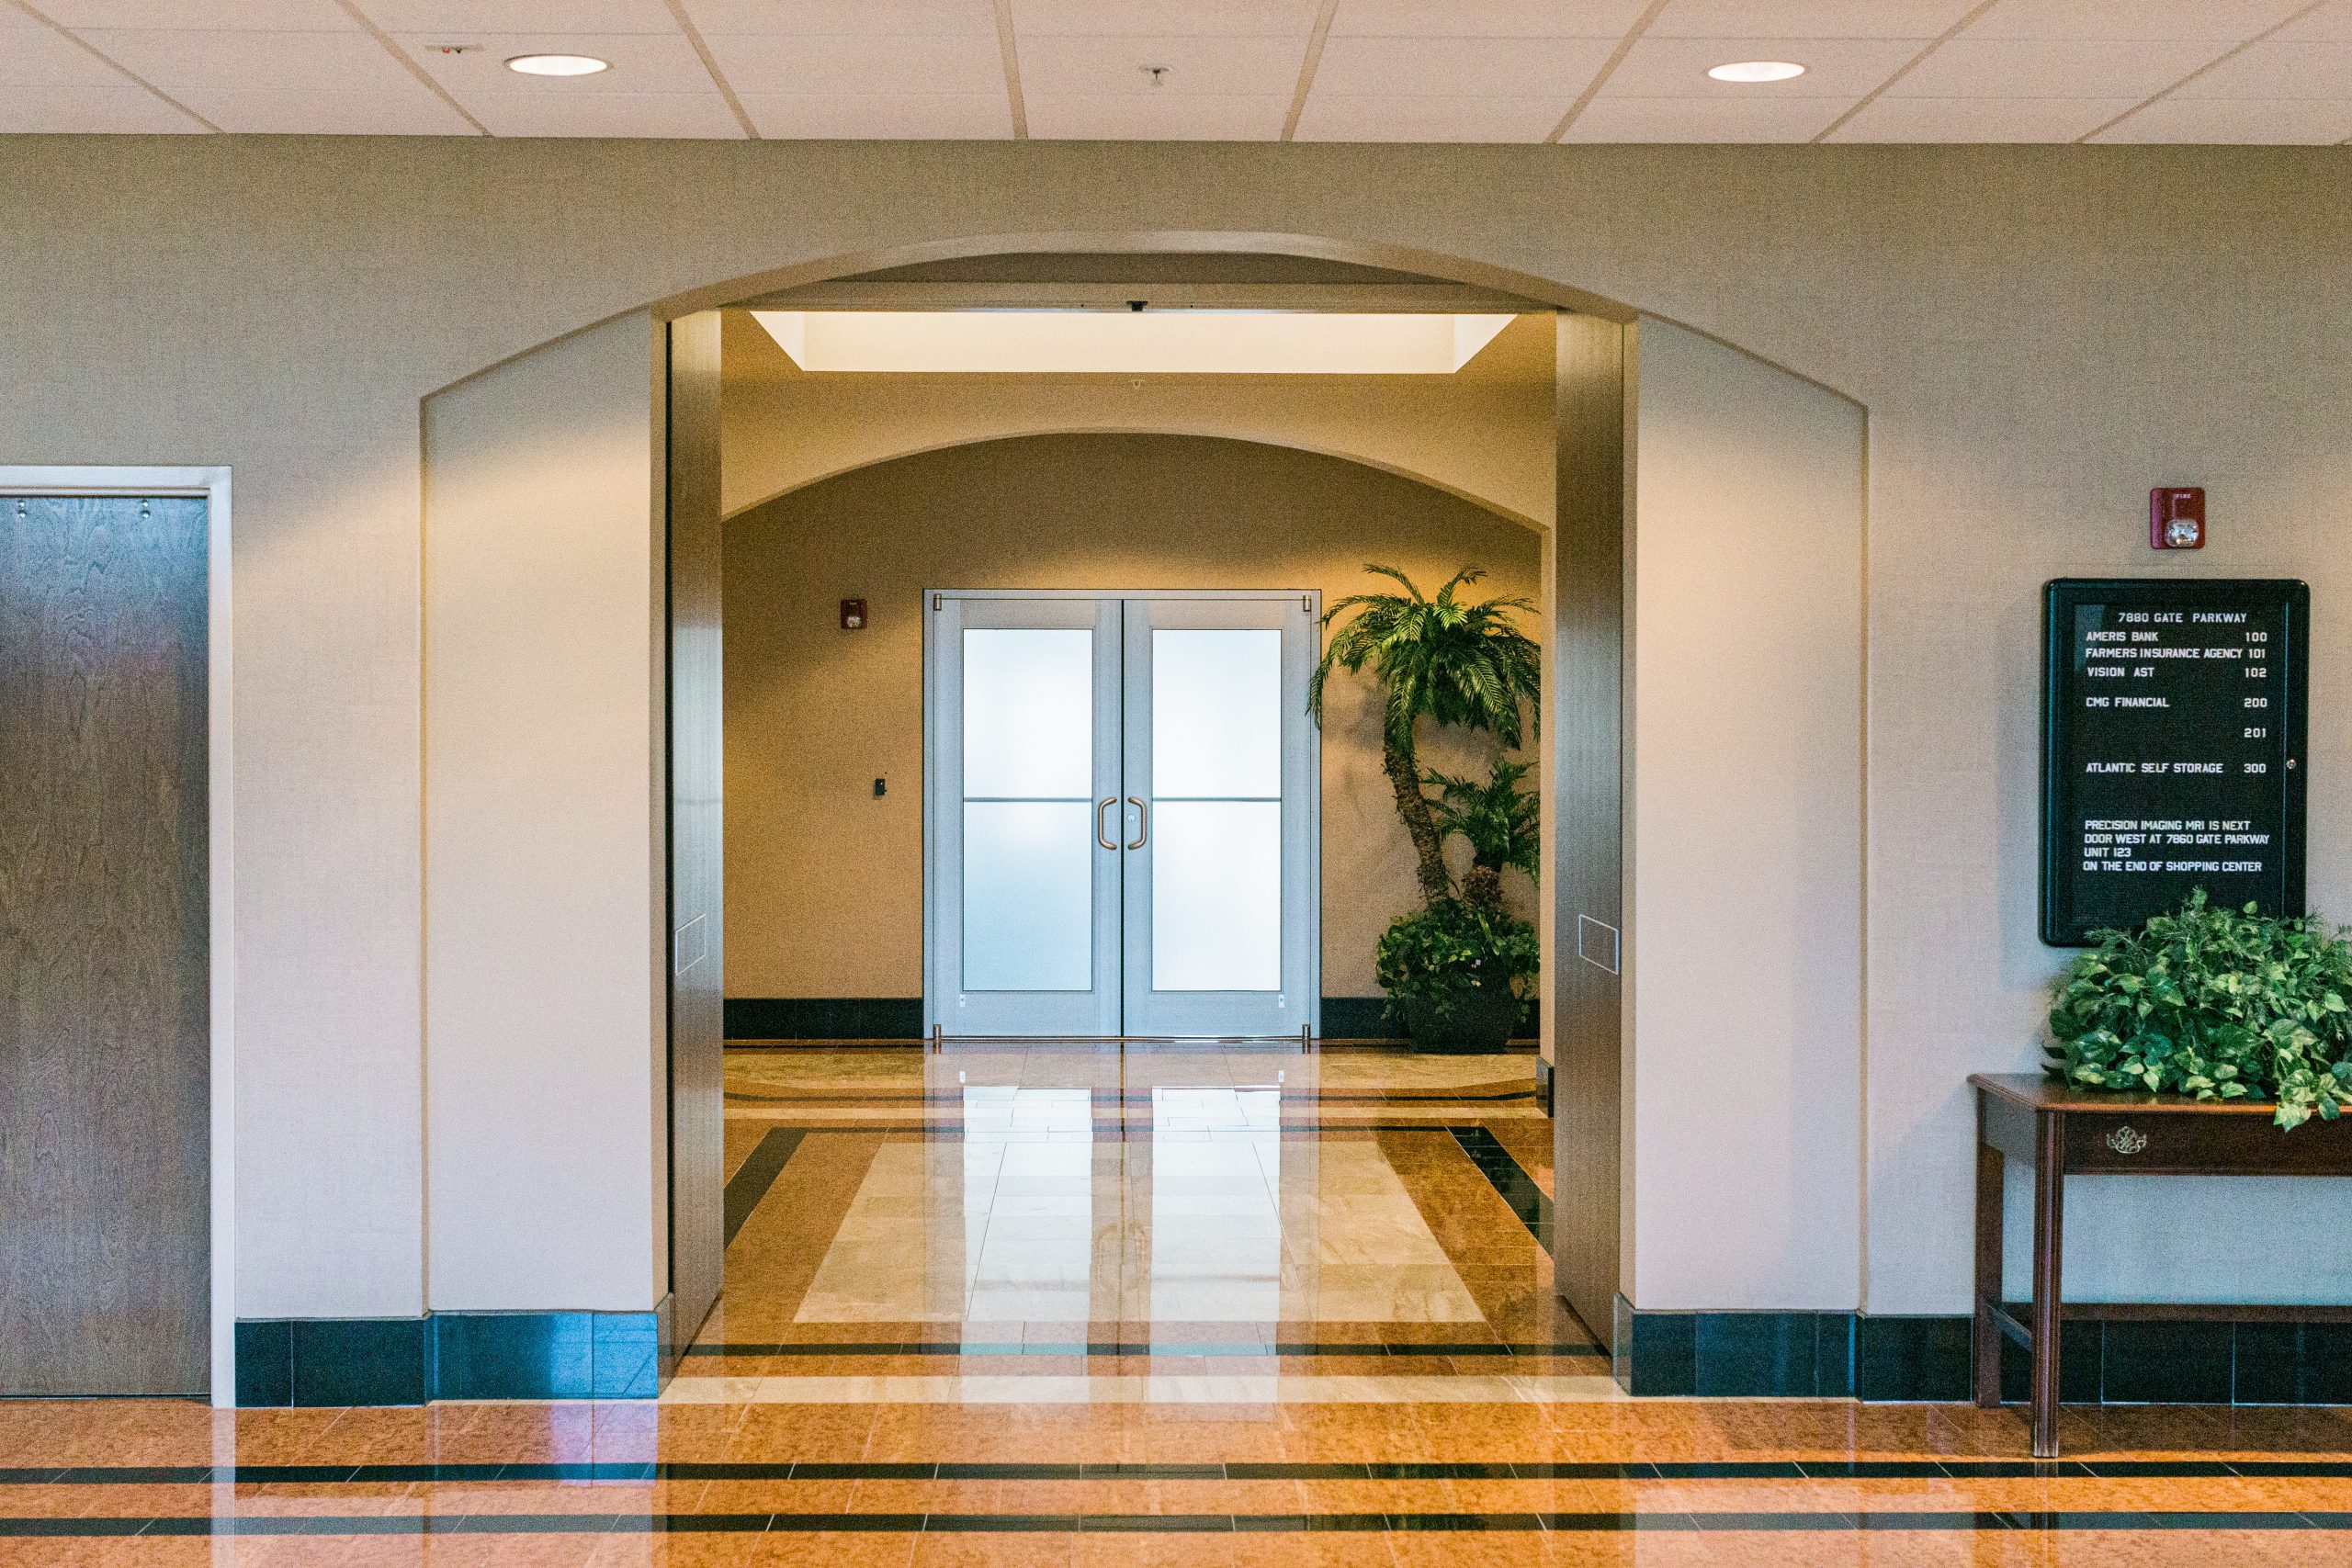 A lobby with glass doors.